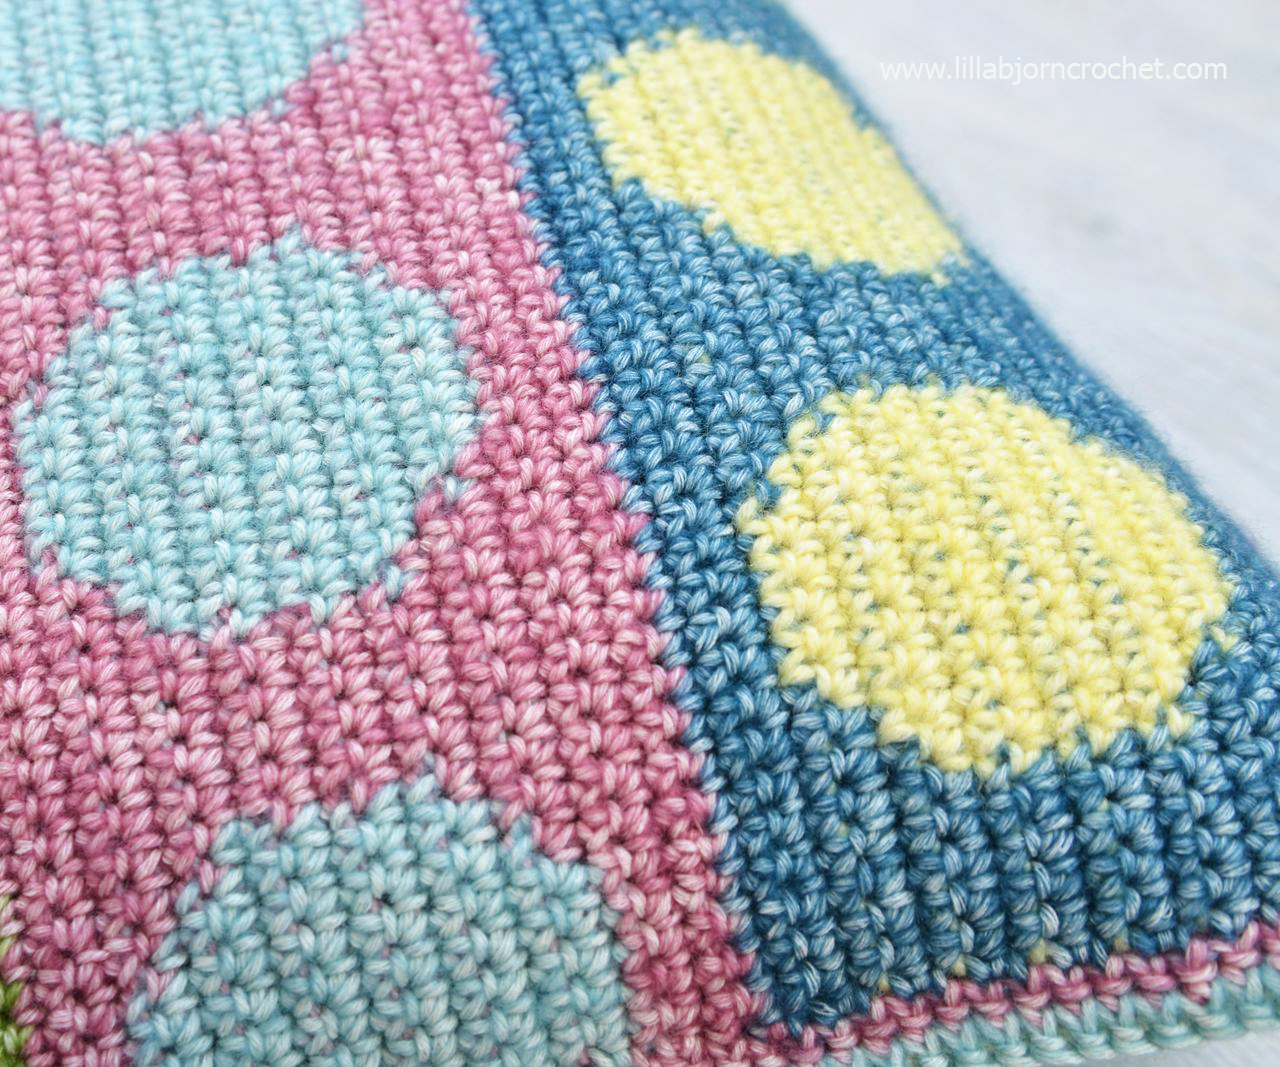 How to do Tapestry Crochet: step-by-step photo tutorial